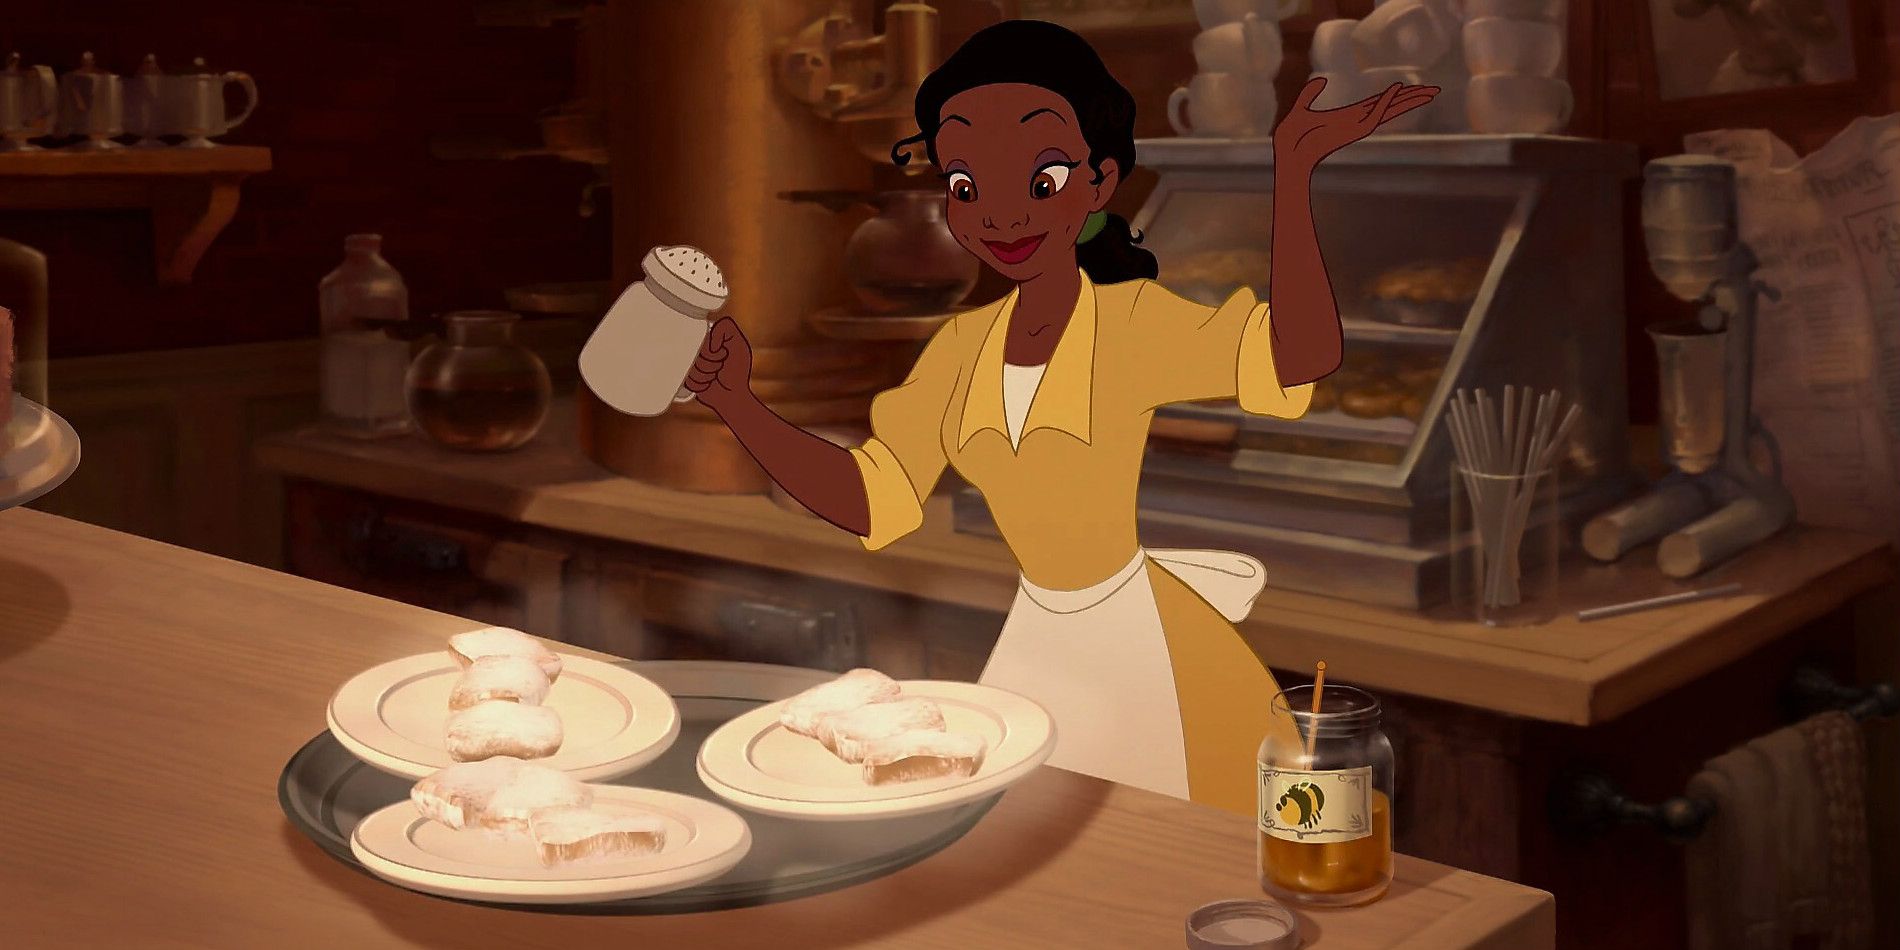 Tiana dusting beignets in Princess and the Frog